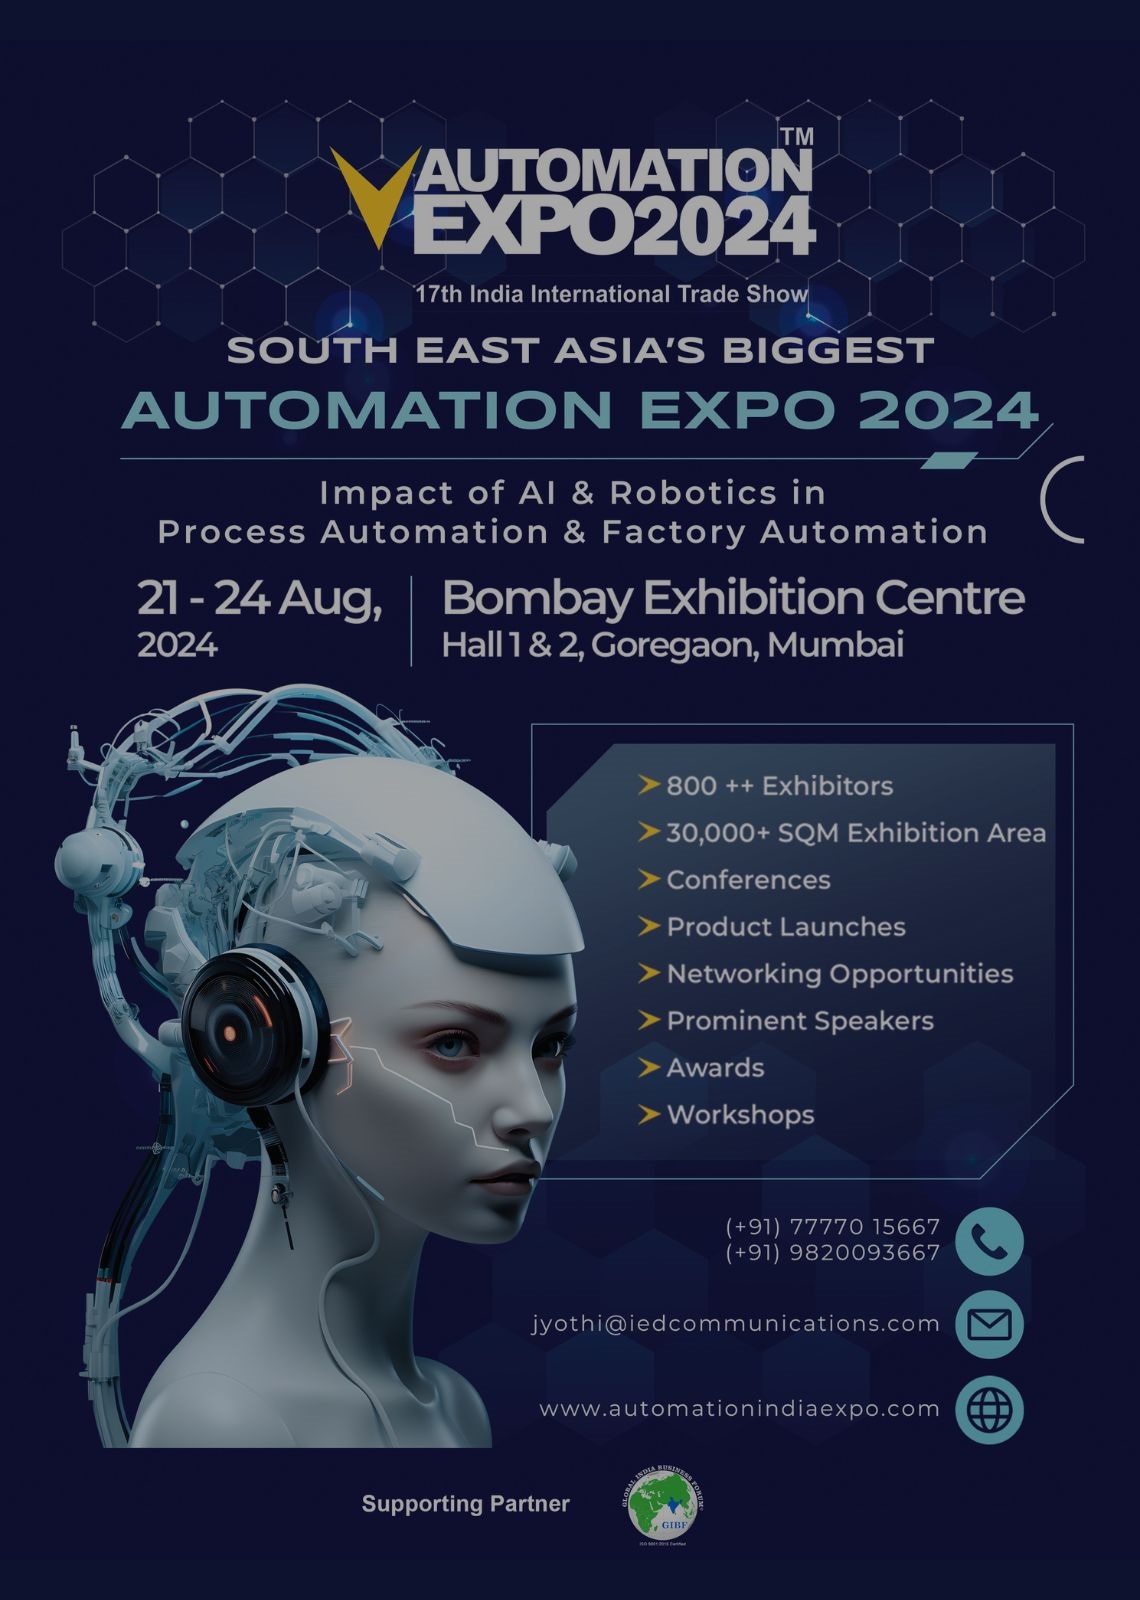 GIBF Collabrative Upcoming Event - Automation Expo 2024